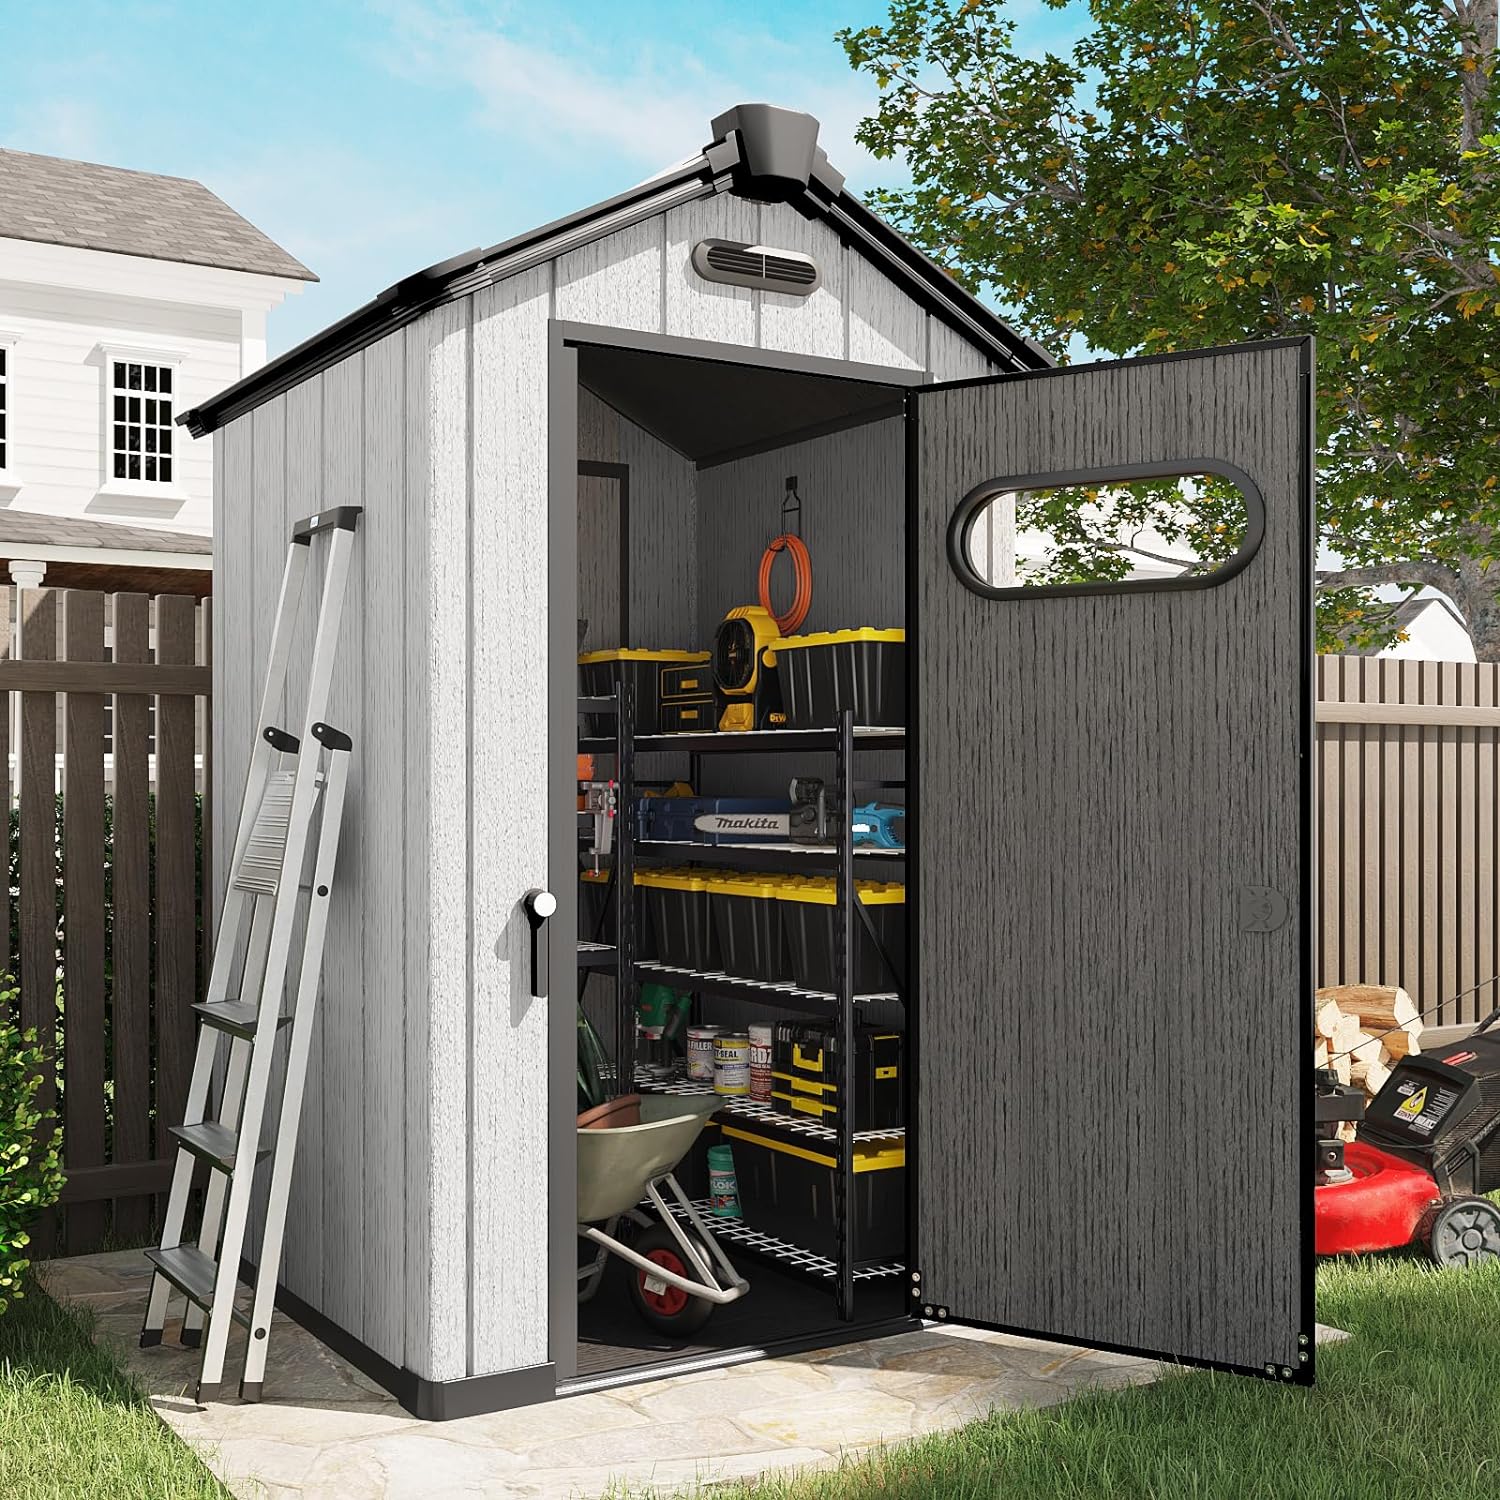 3.8 x 4.0 ft Resin Tool Shed, Polypropylene Storage Shed with Lockable Doors, Floor Included, Black and Grey